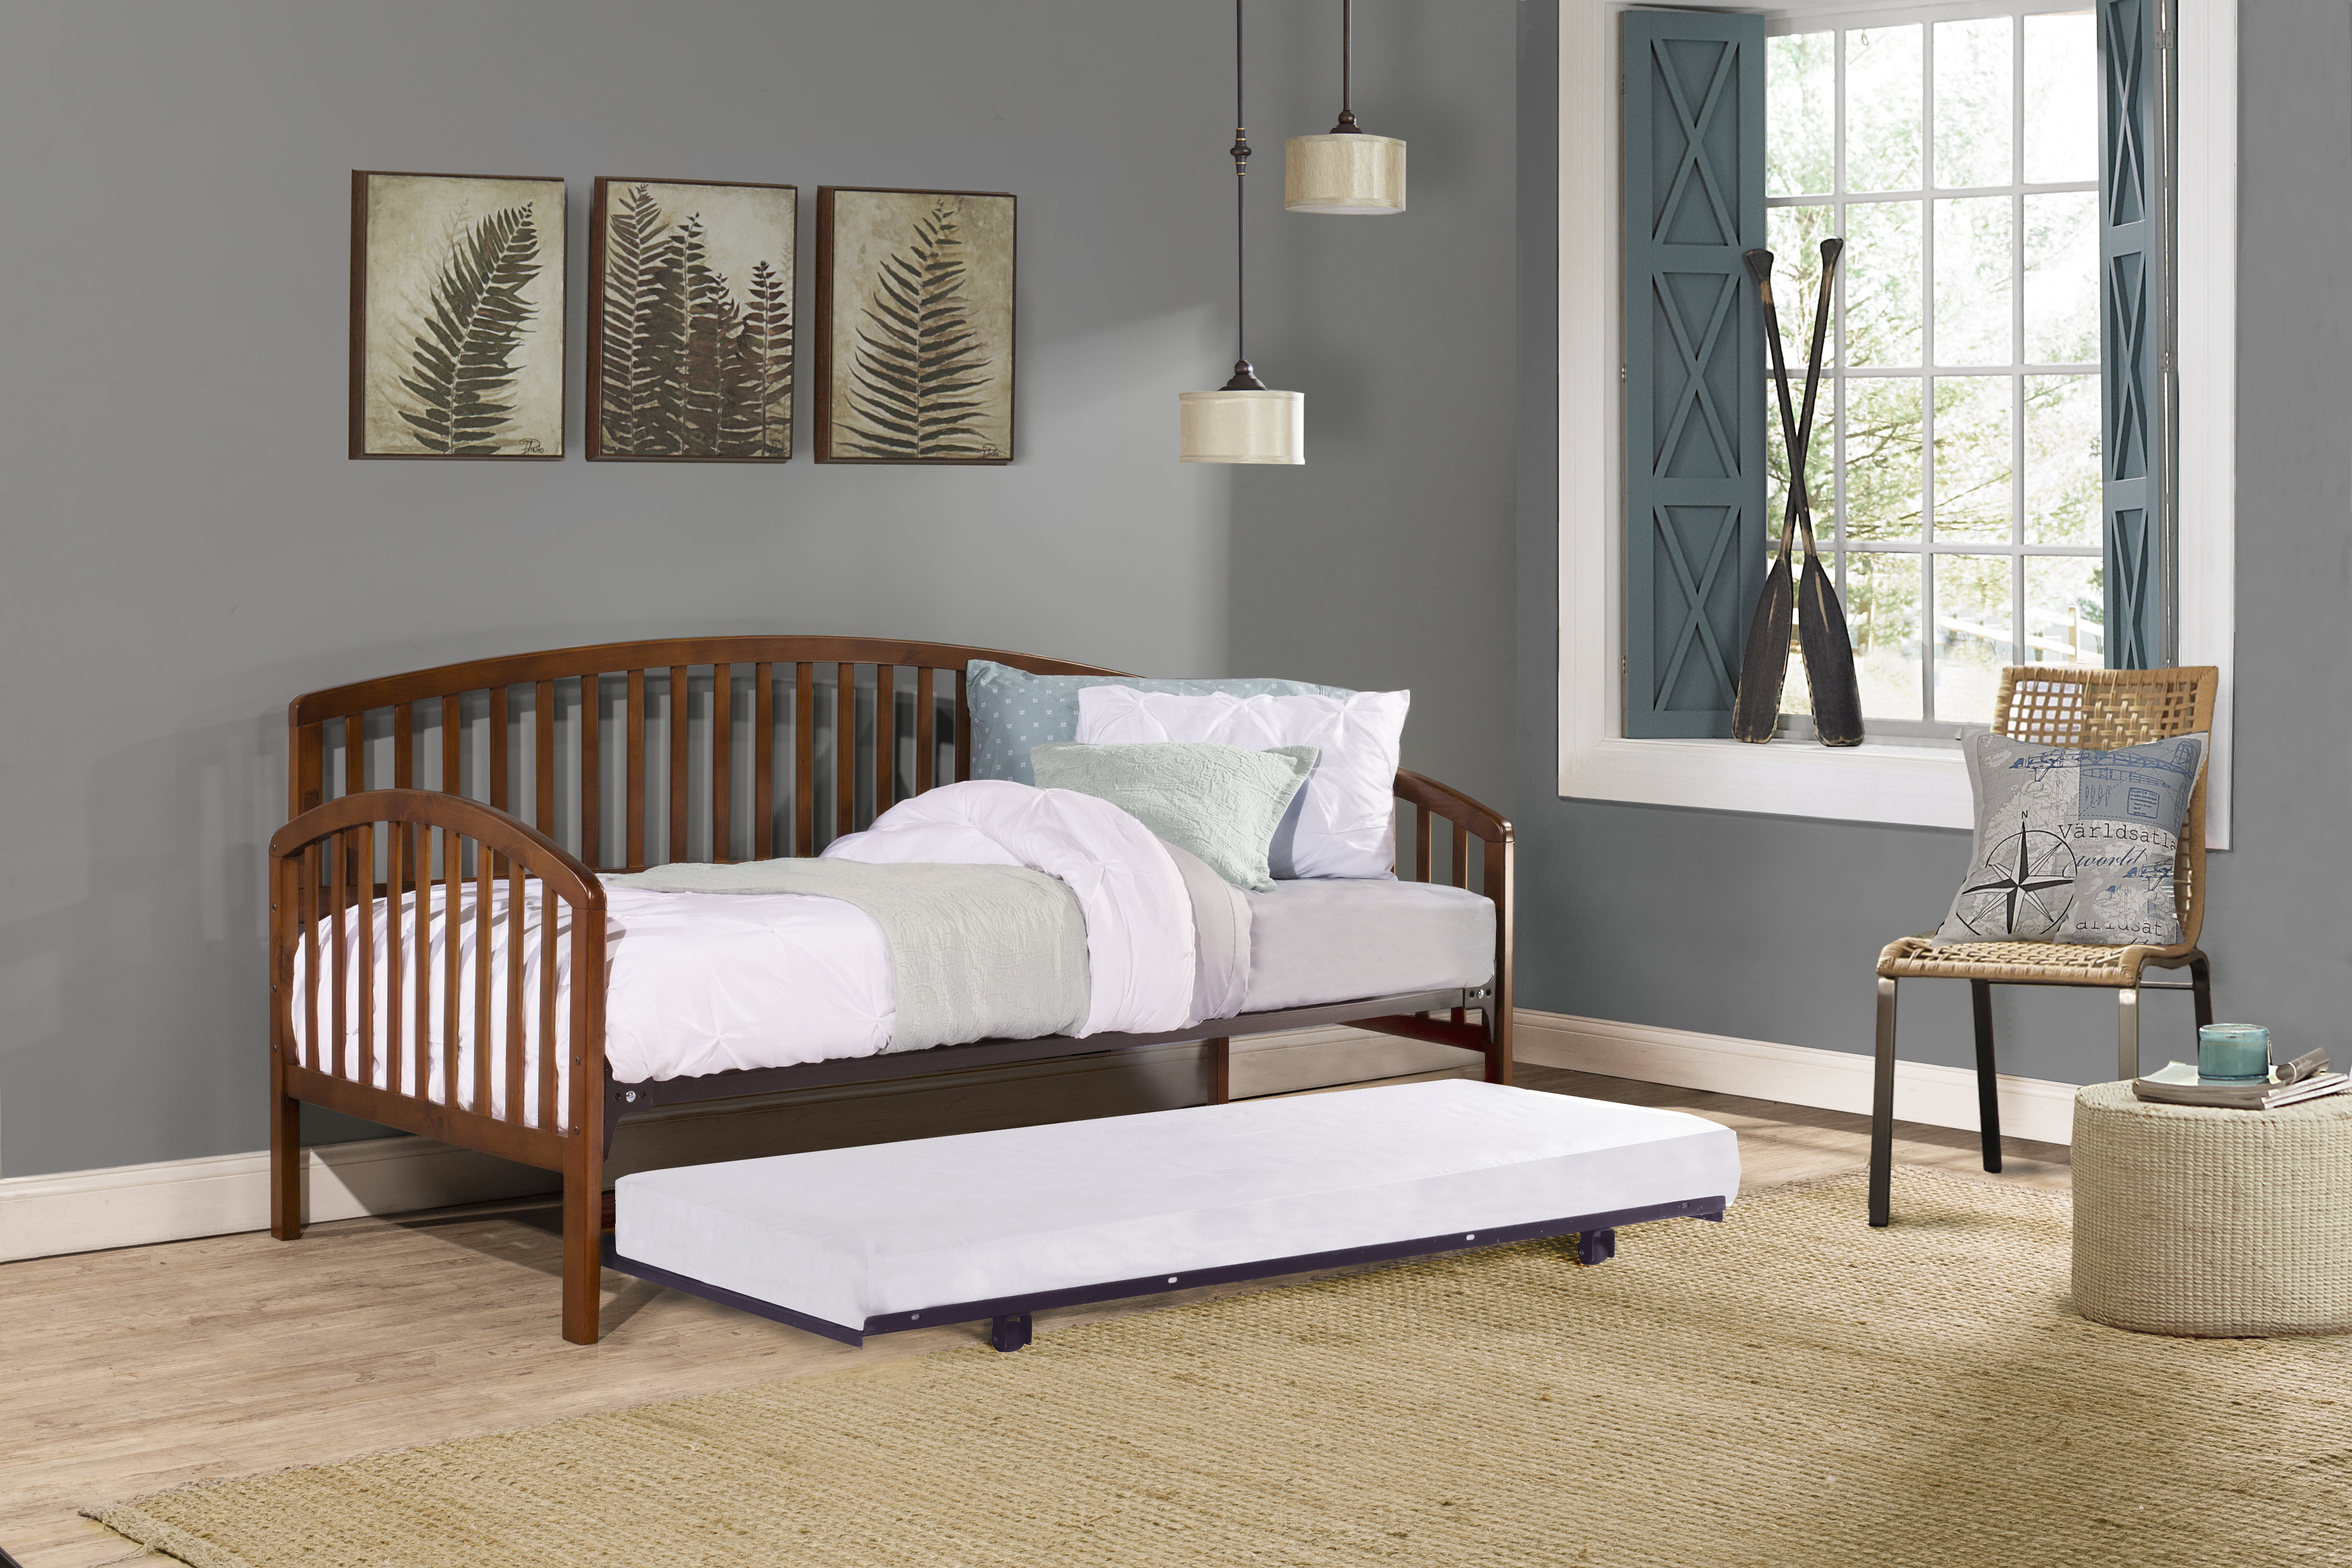 twin mattress double for daybed